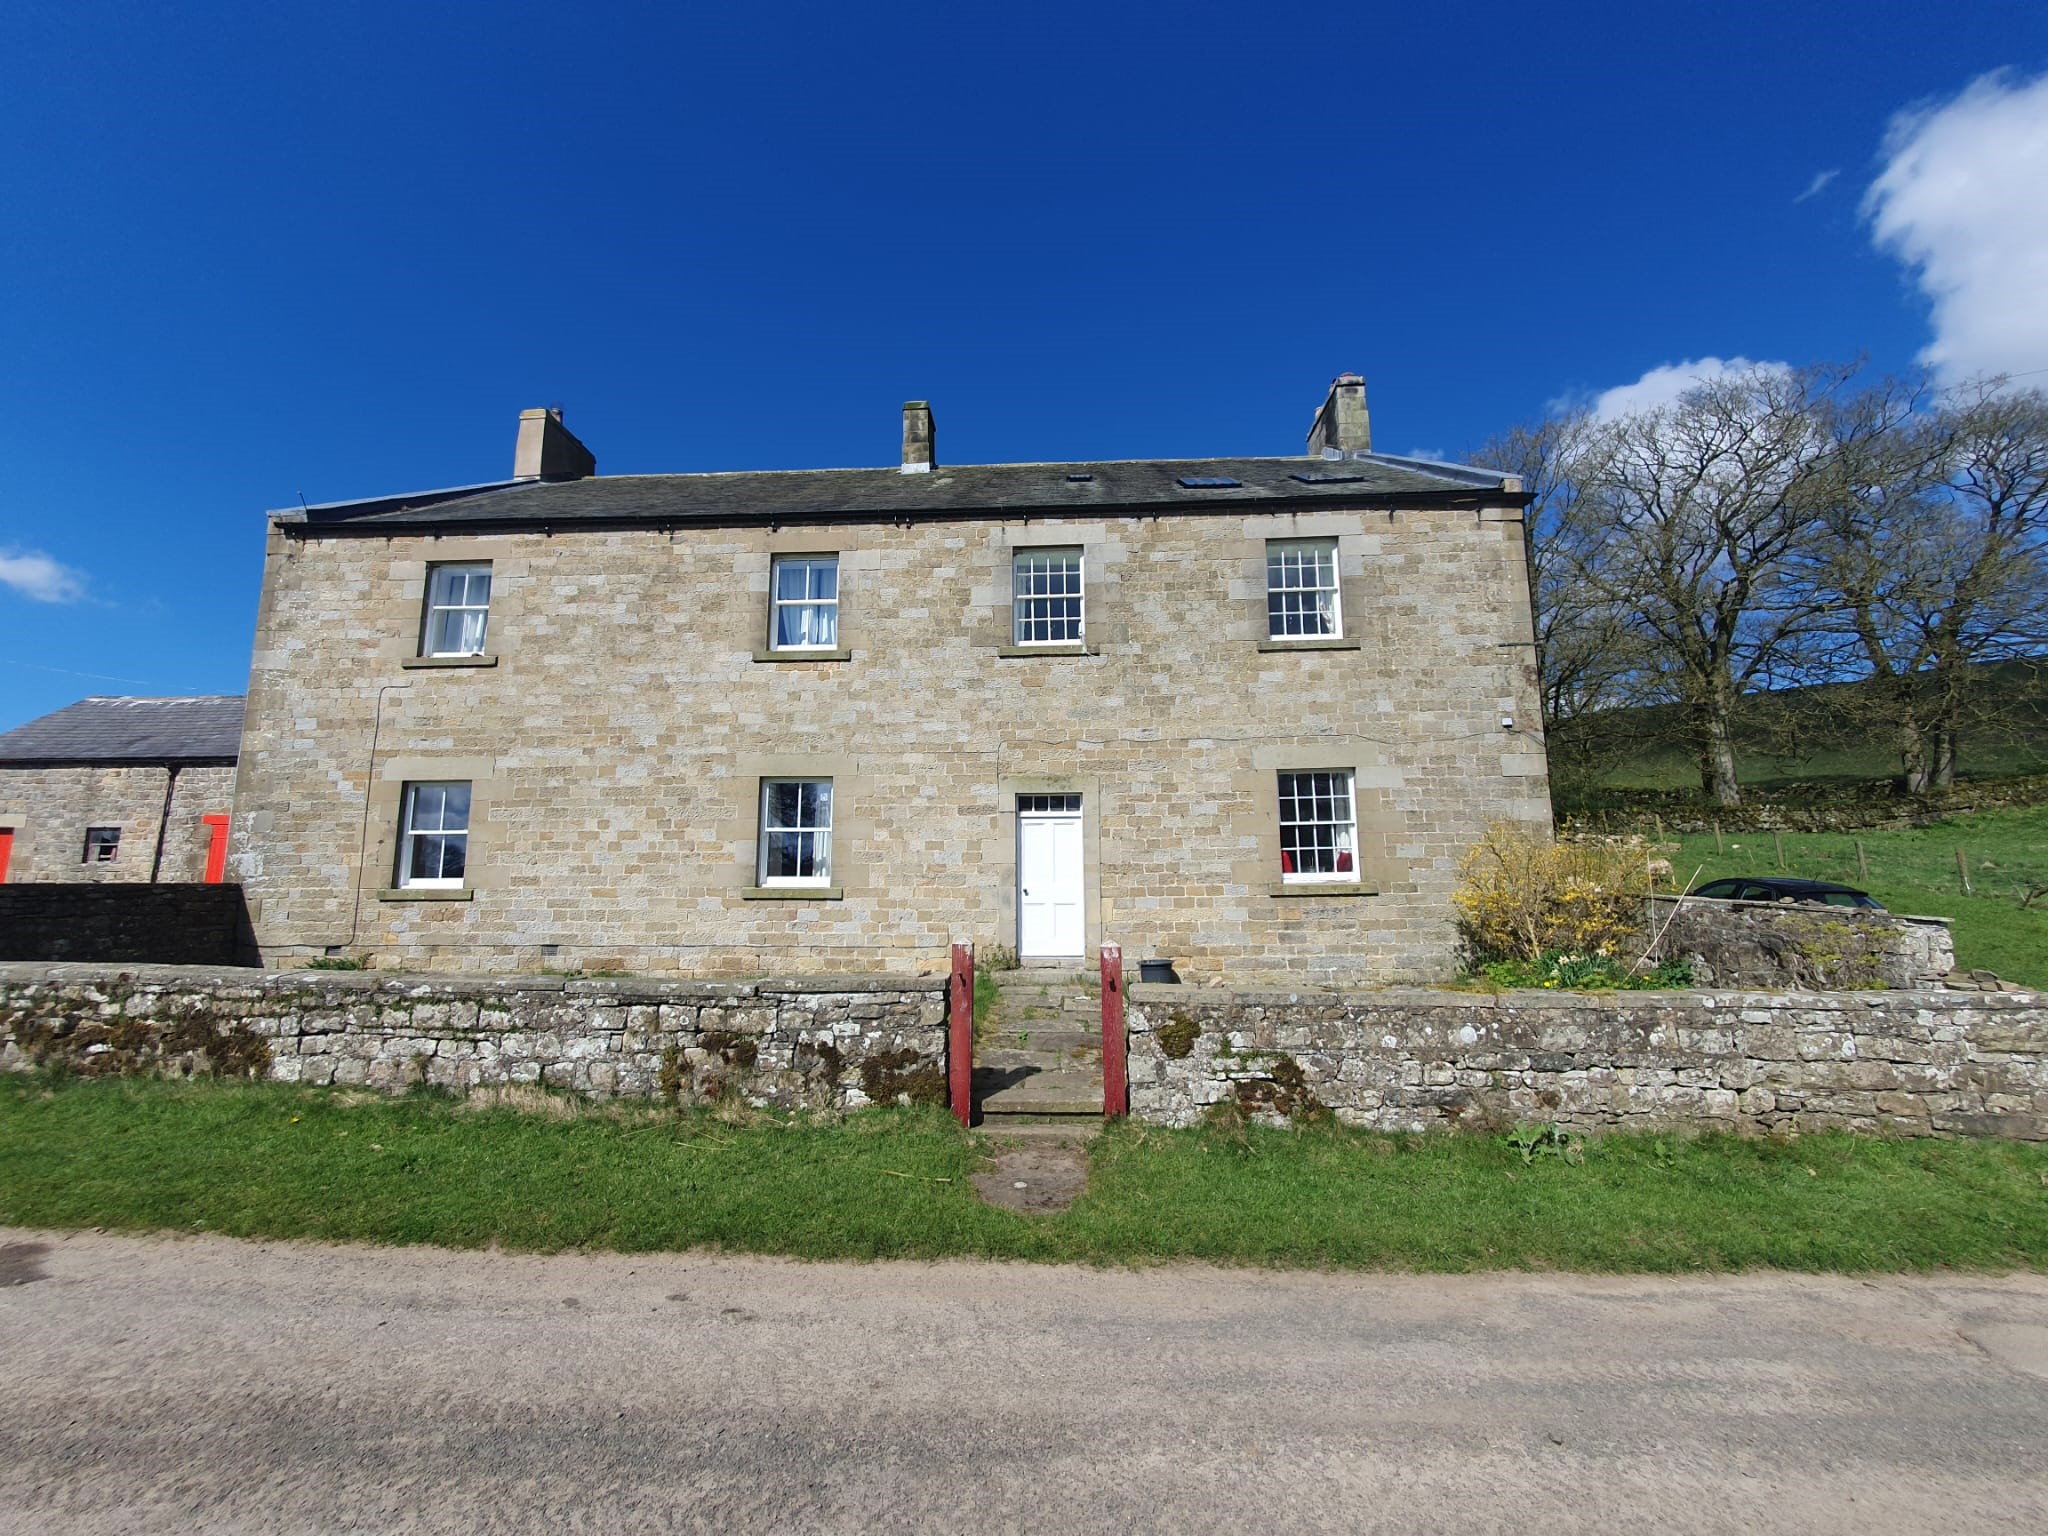 Walltown Farm Cottage And Neighbouring House